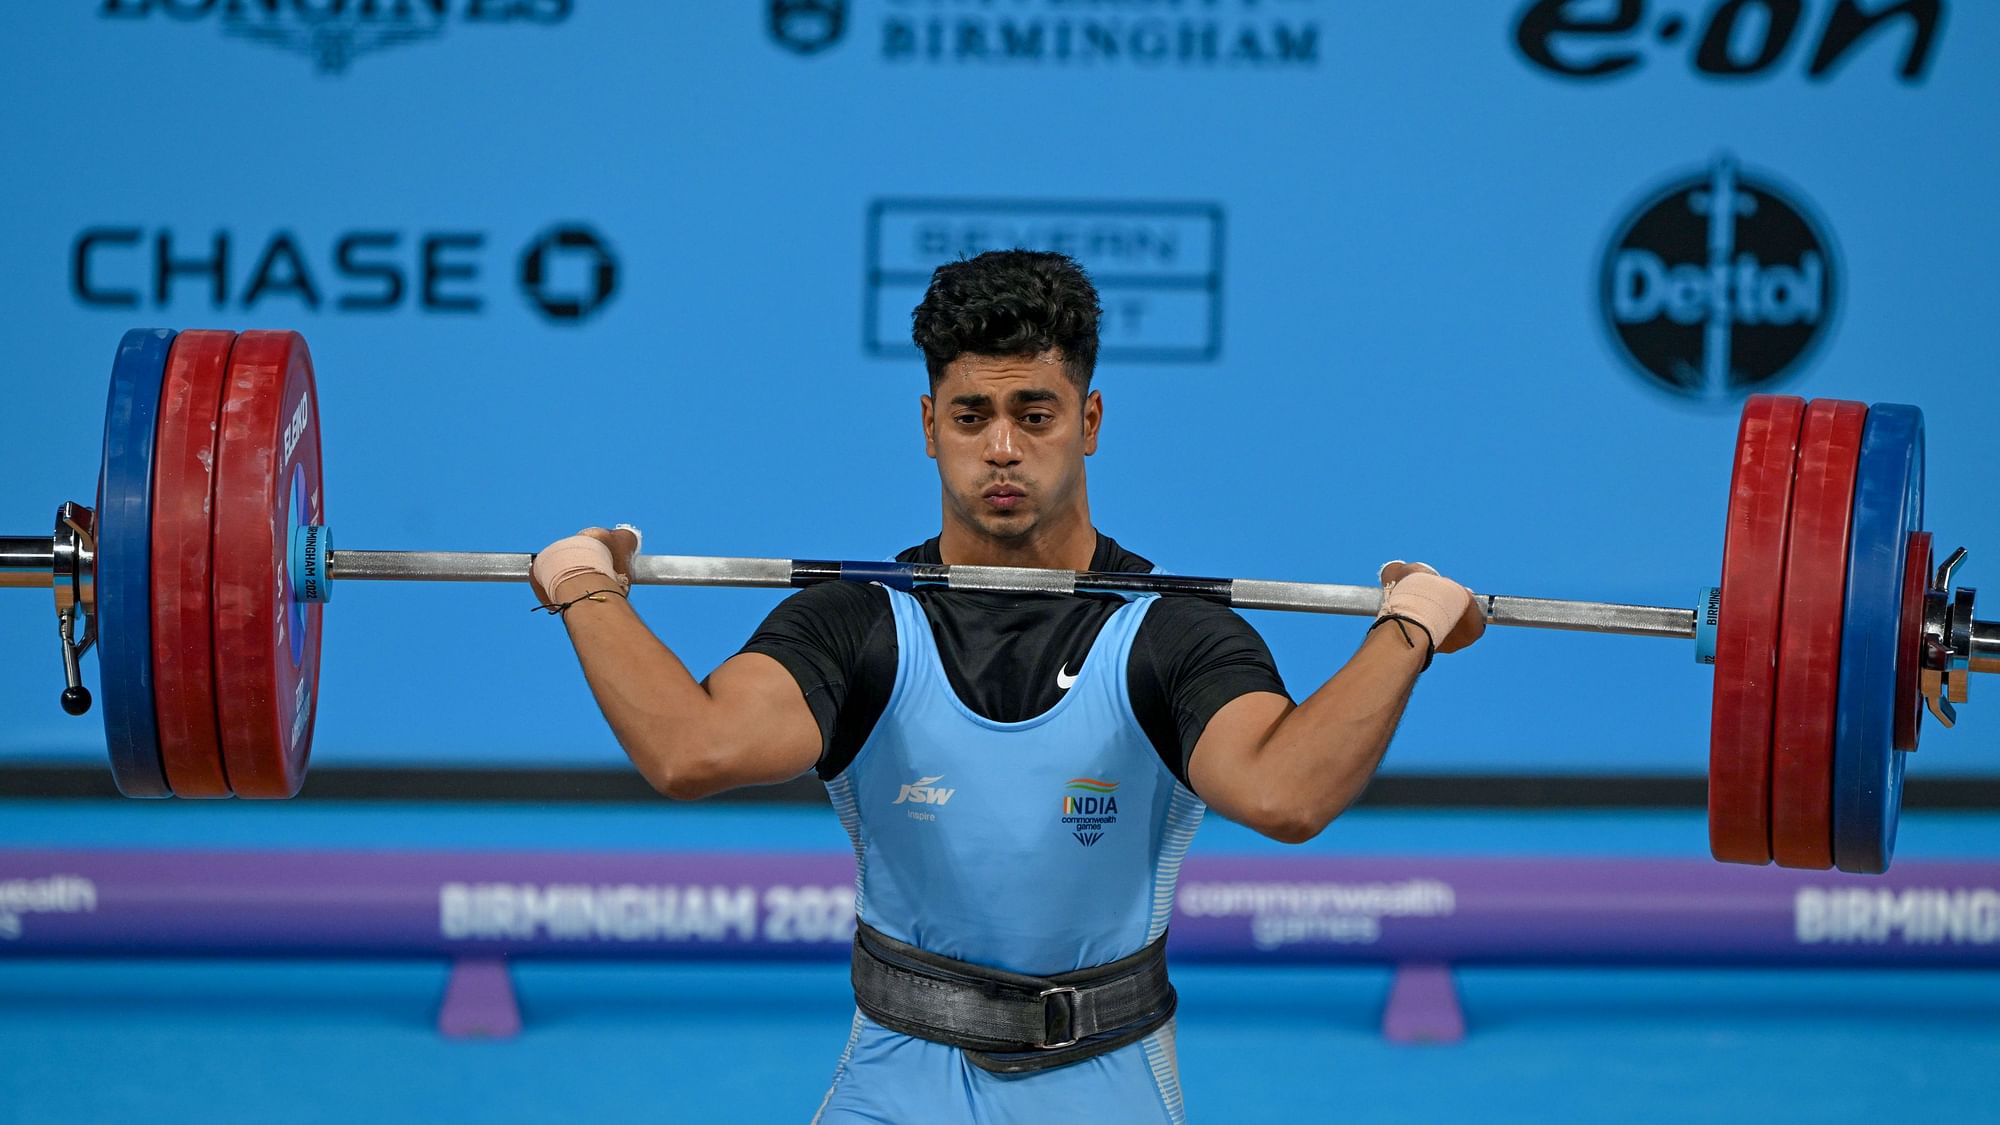 <div class="paragraphs"><p>Birmingham: India's Achinta Sheuli in action during the men's 73kg weightlifting final of the Commonwealth Games 2022.</p></div><div class="paragraphs"><p><br></p></div>